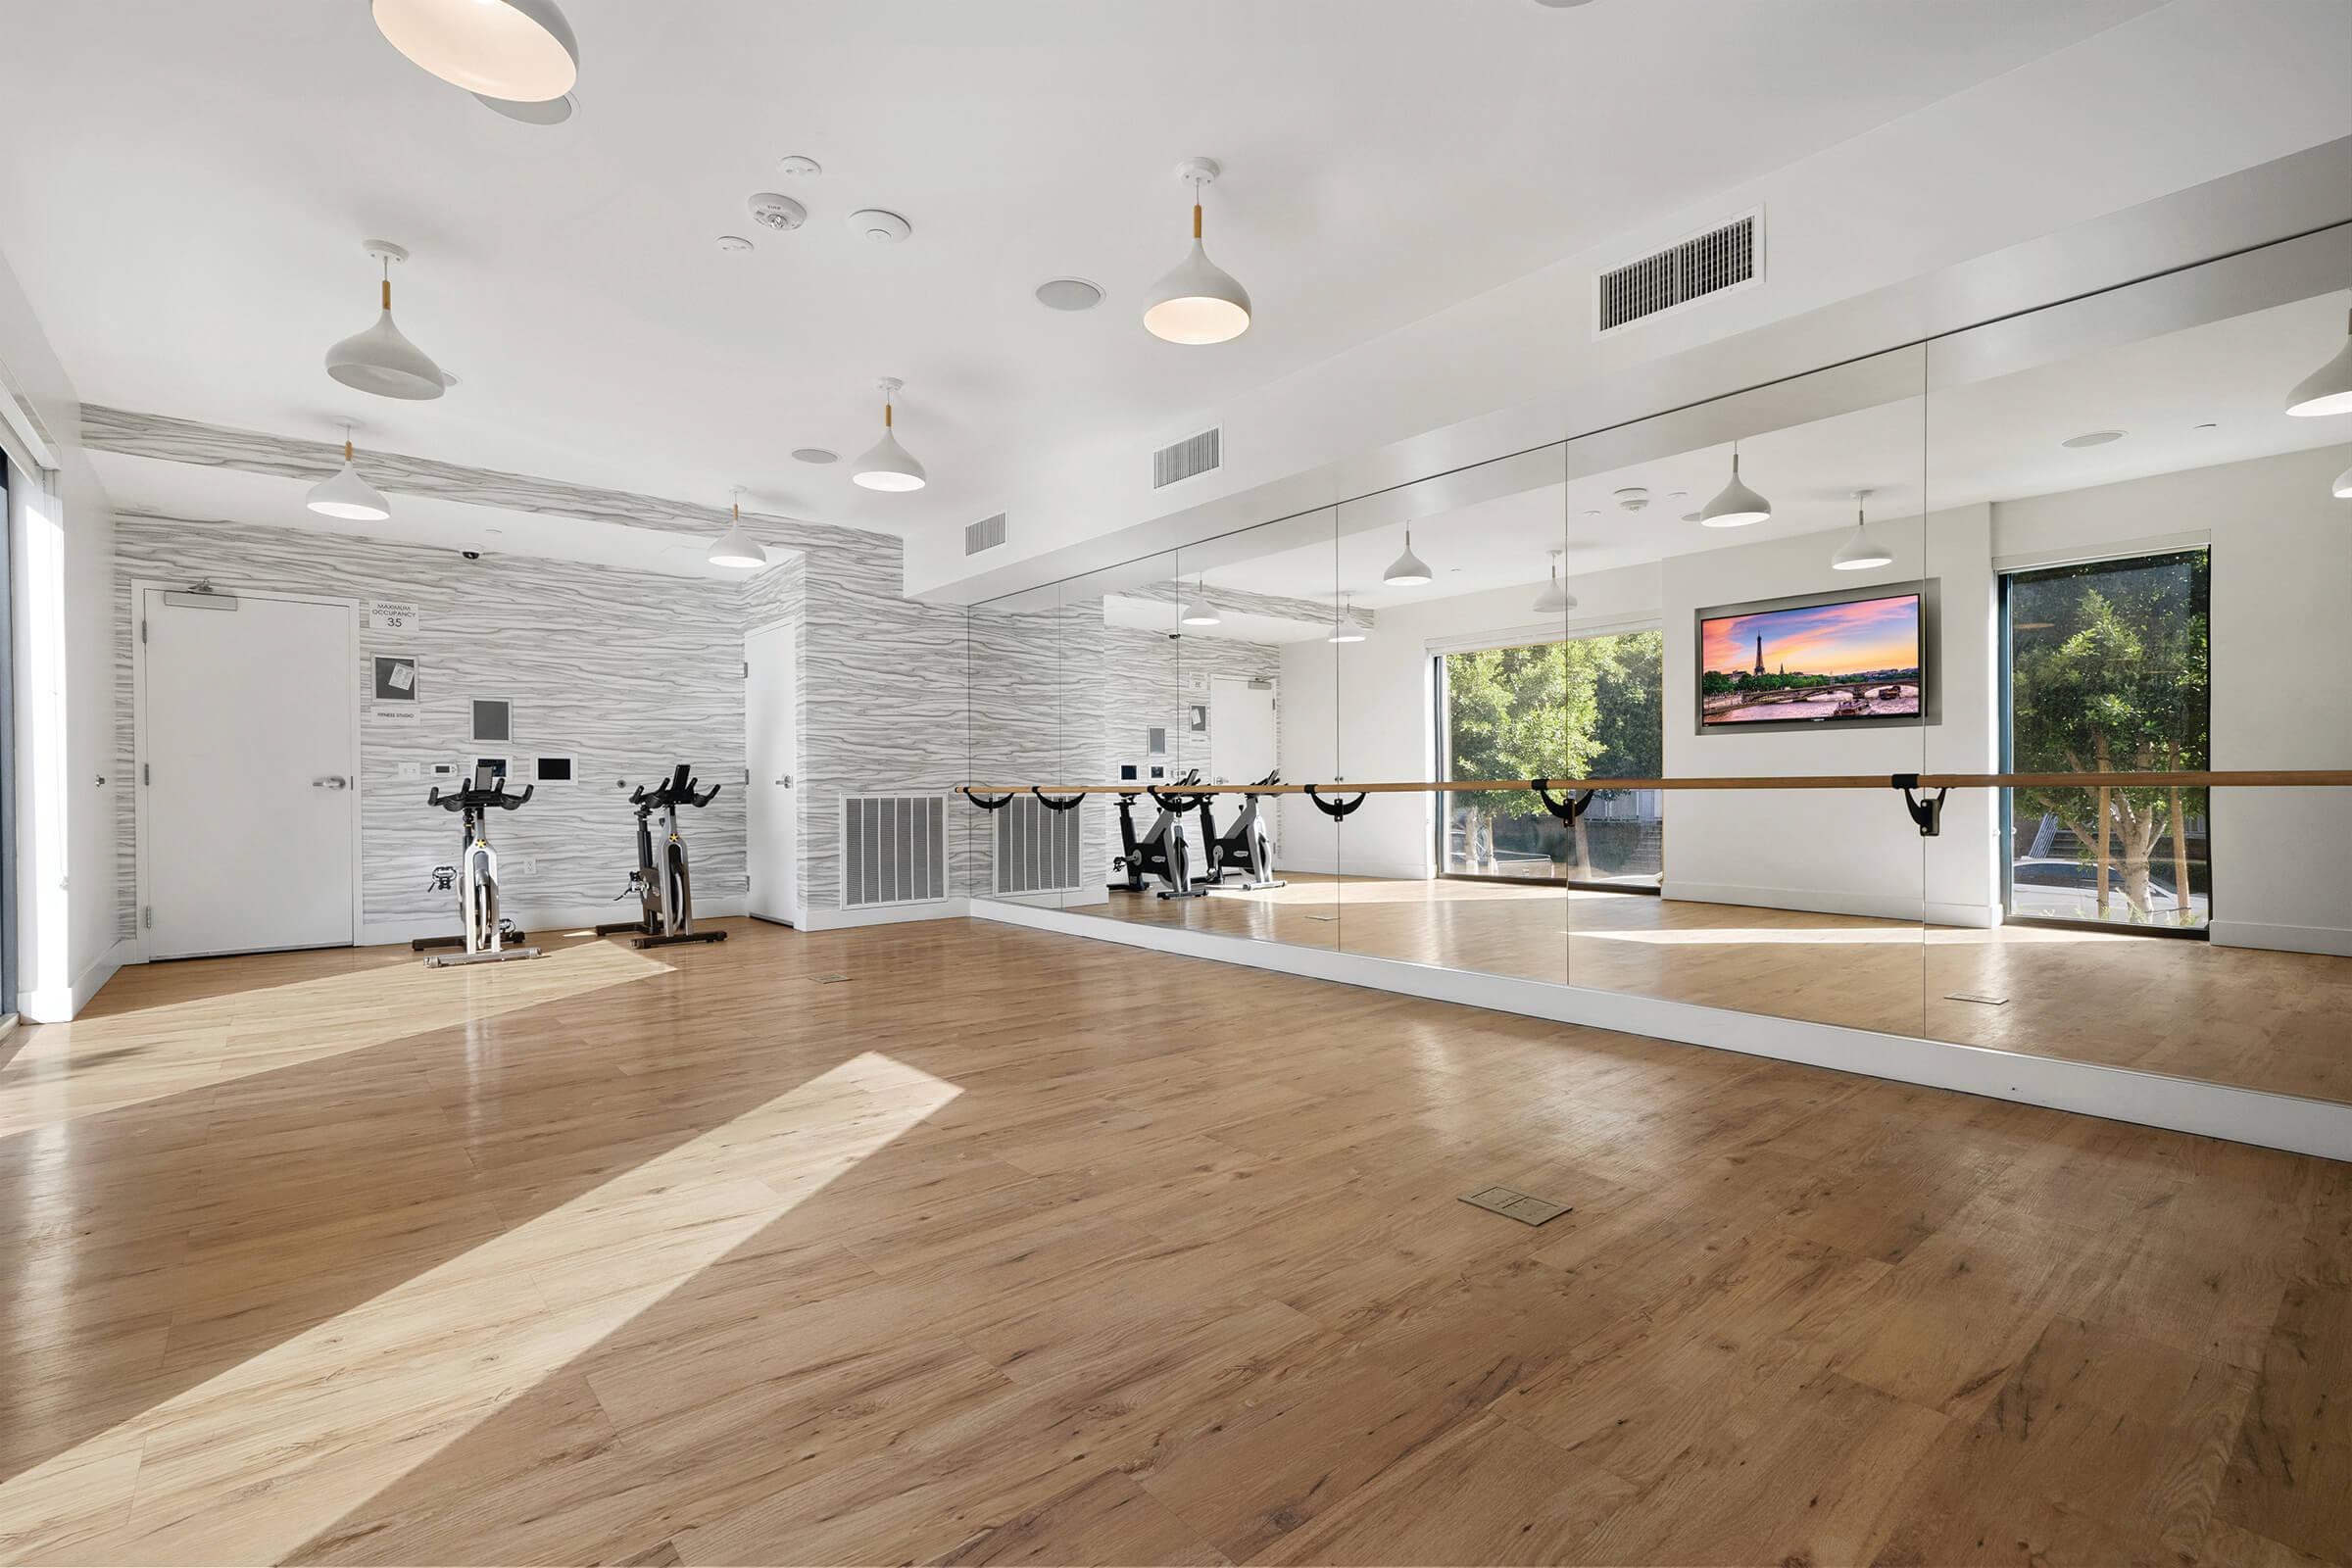 Get your blood pumping in our yoga and spin studio